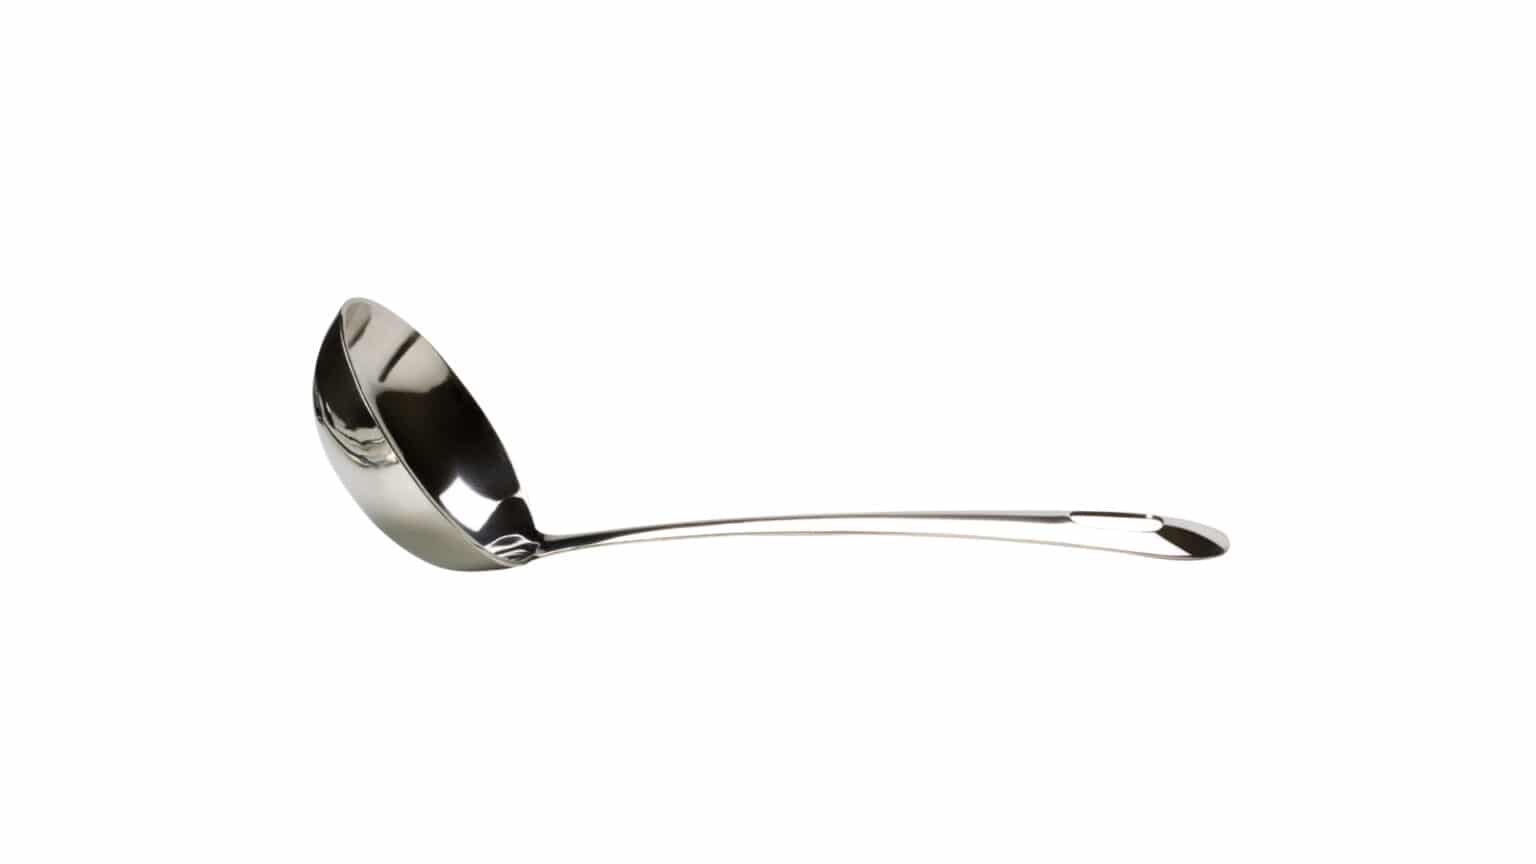 Ladle for Pancakes